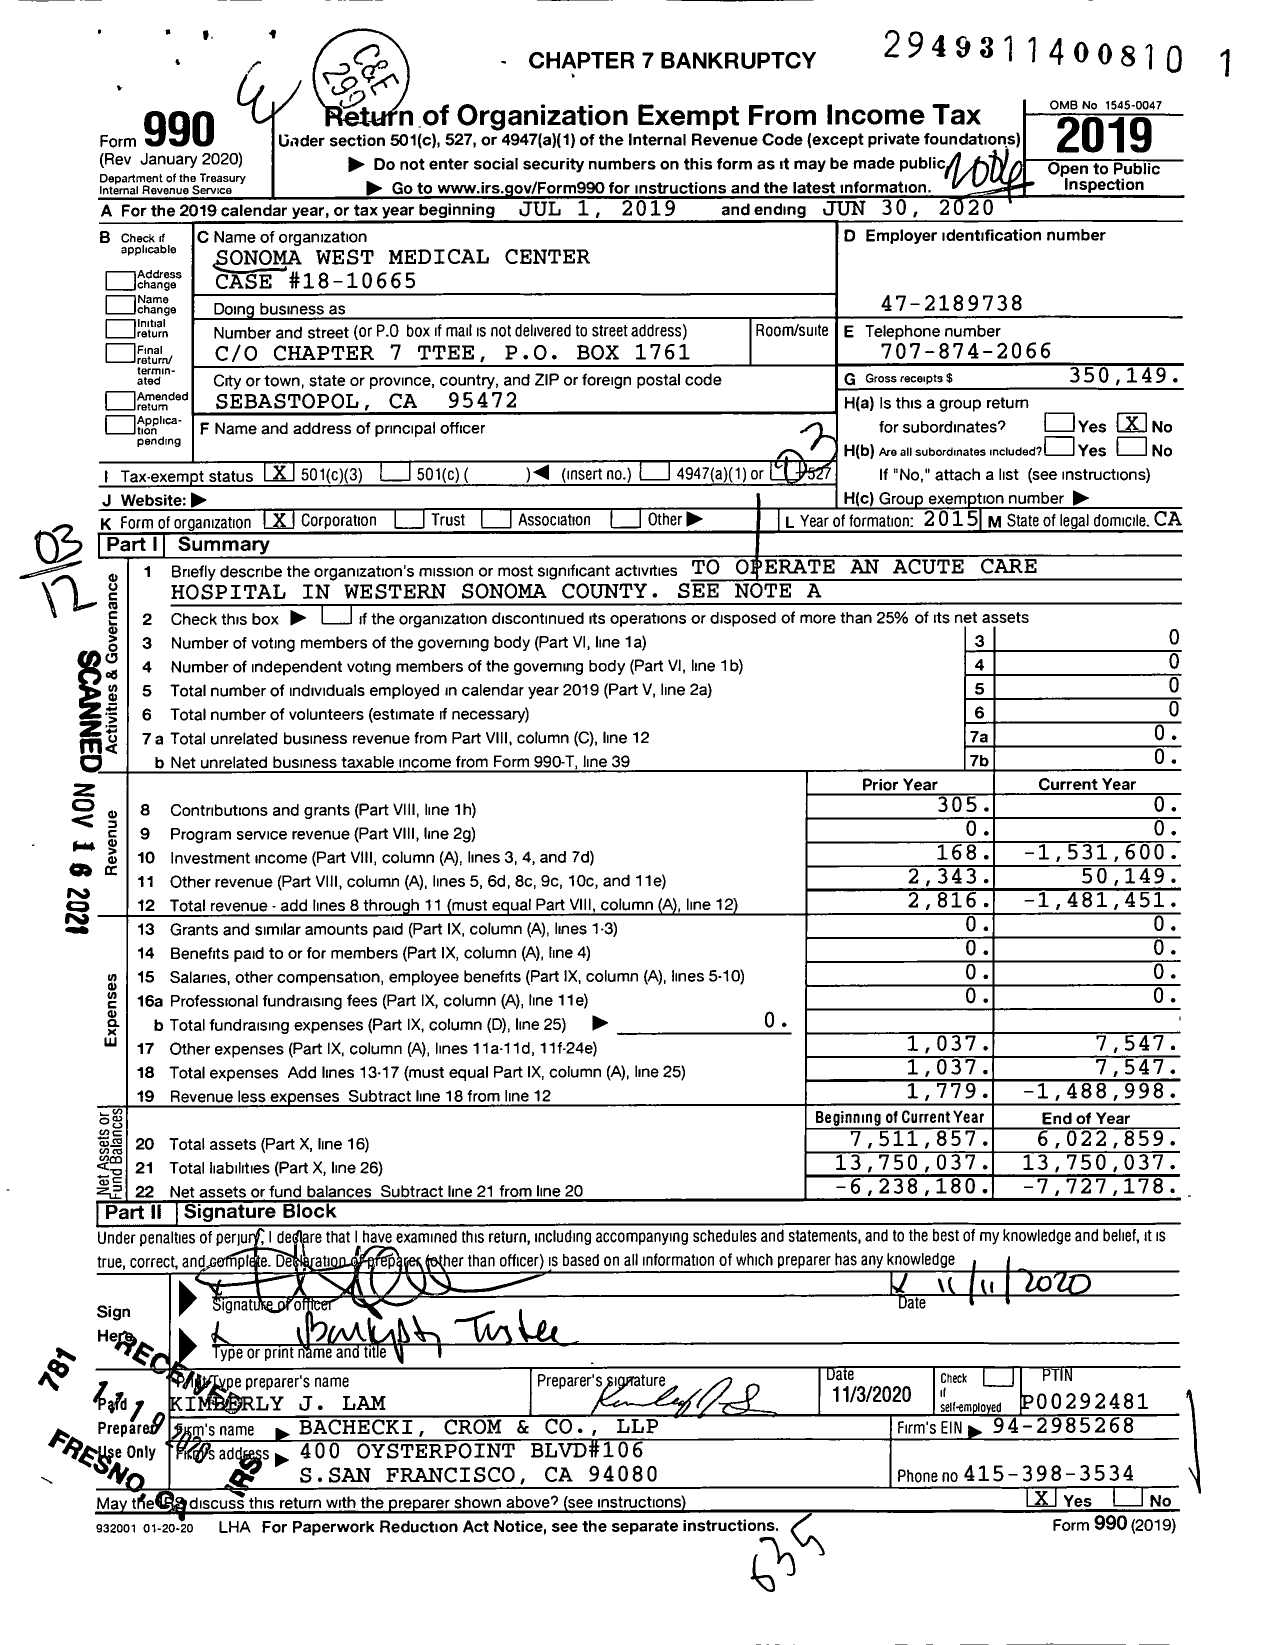 Image of first page of 2019 Form 990 for Sonoma West Medical Center Case #18-10665